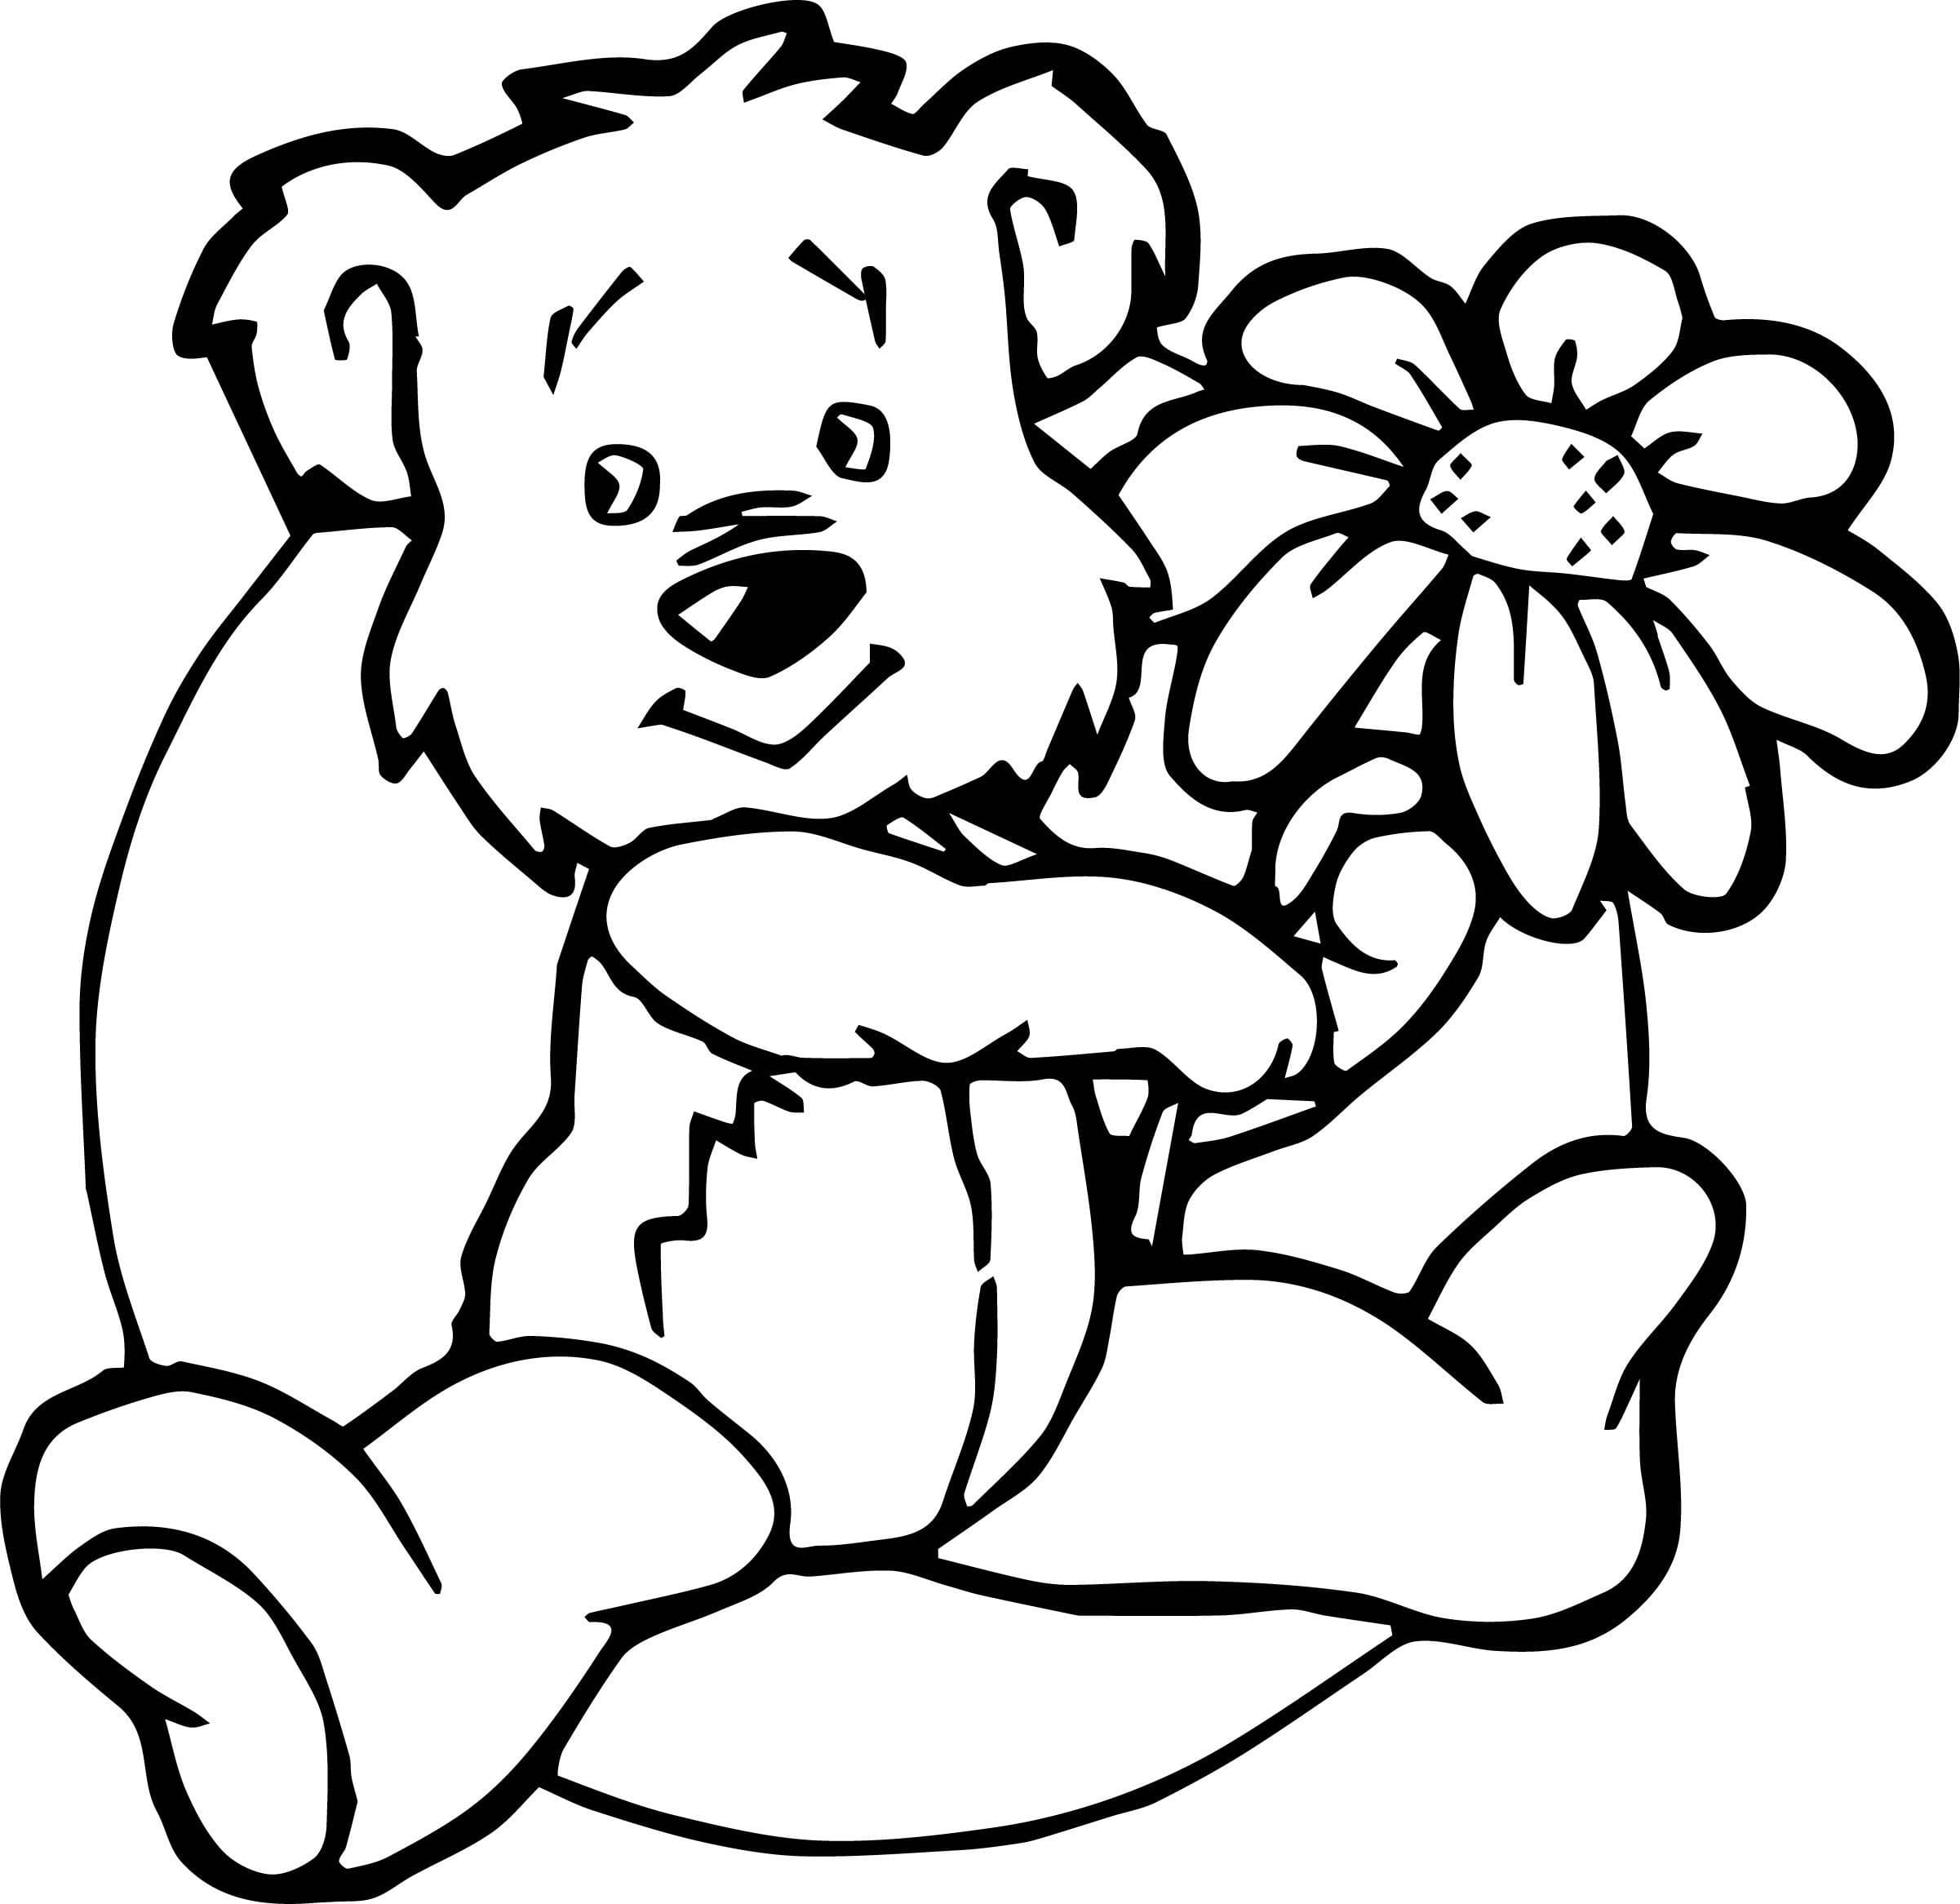 Coloring page Teddy Bears Teddy bear with a flower